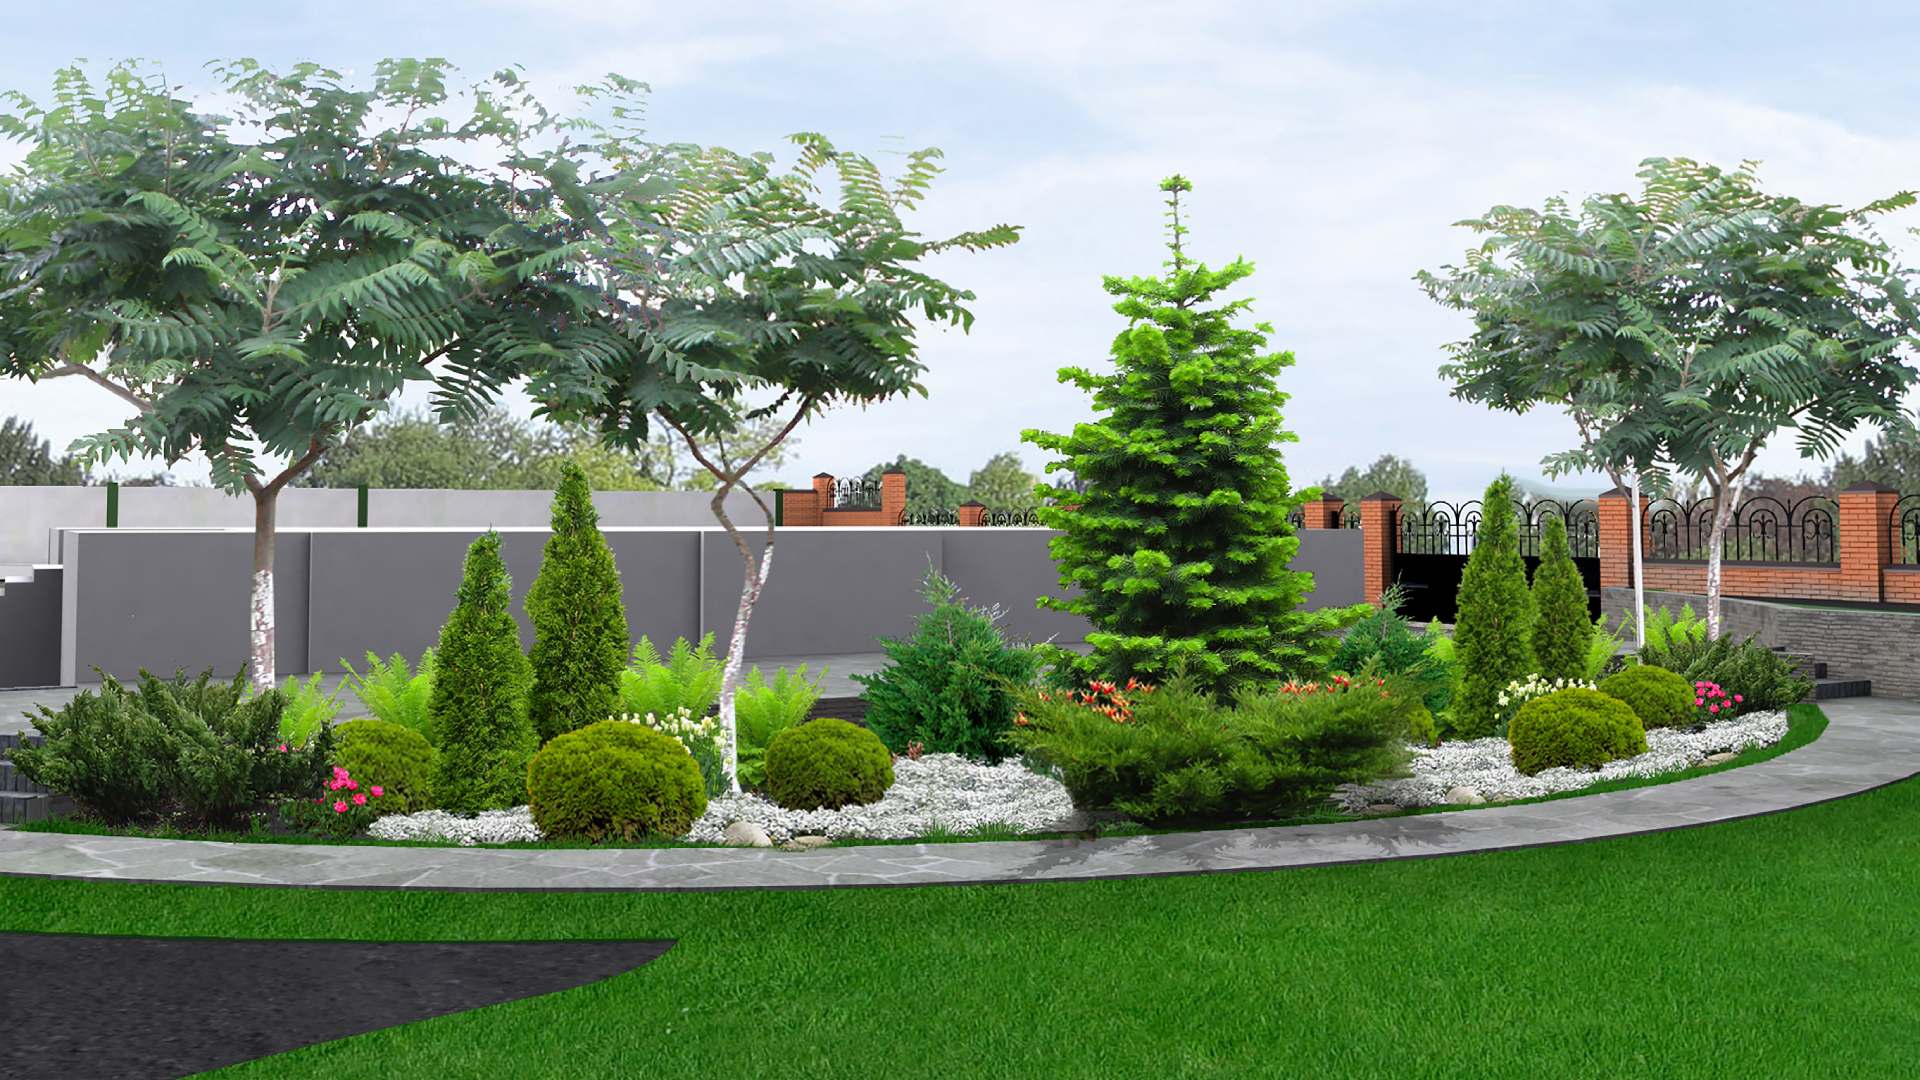 Should I Invest in a Design Rendering for My Landscape Project?